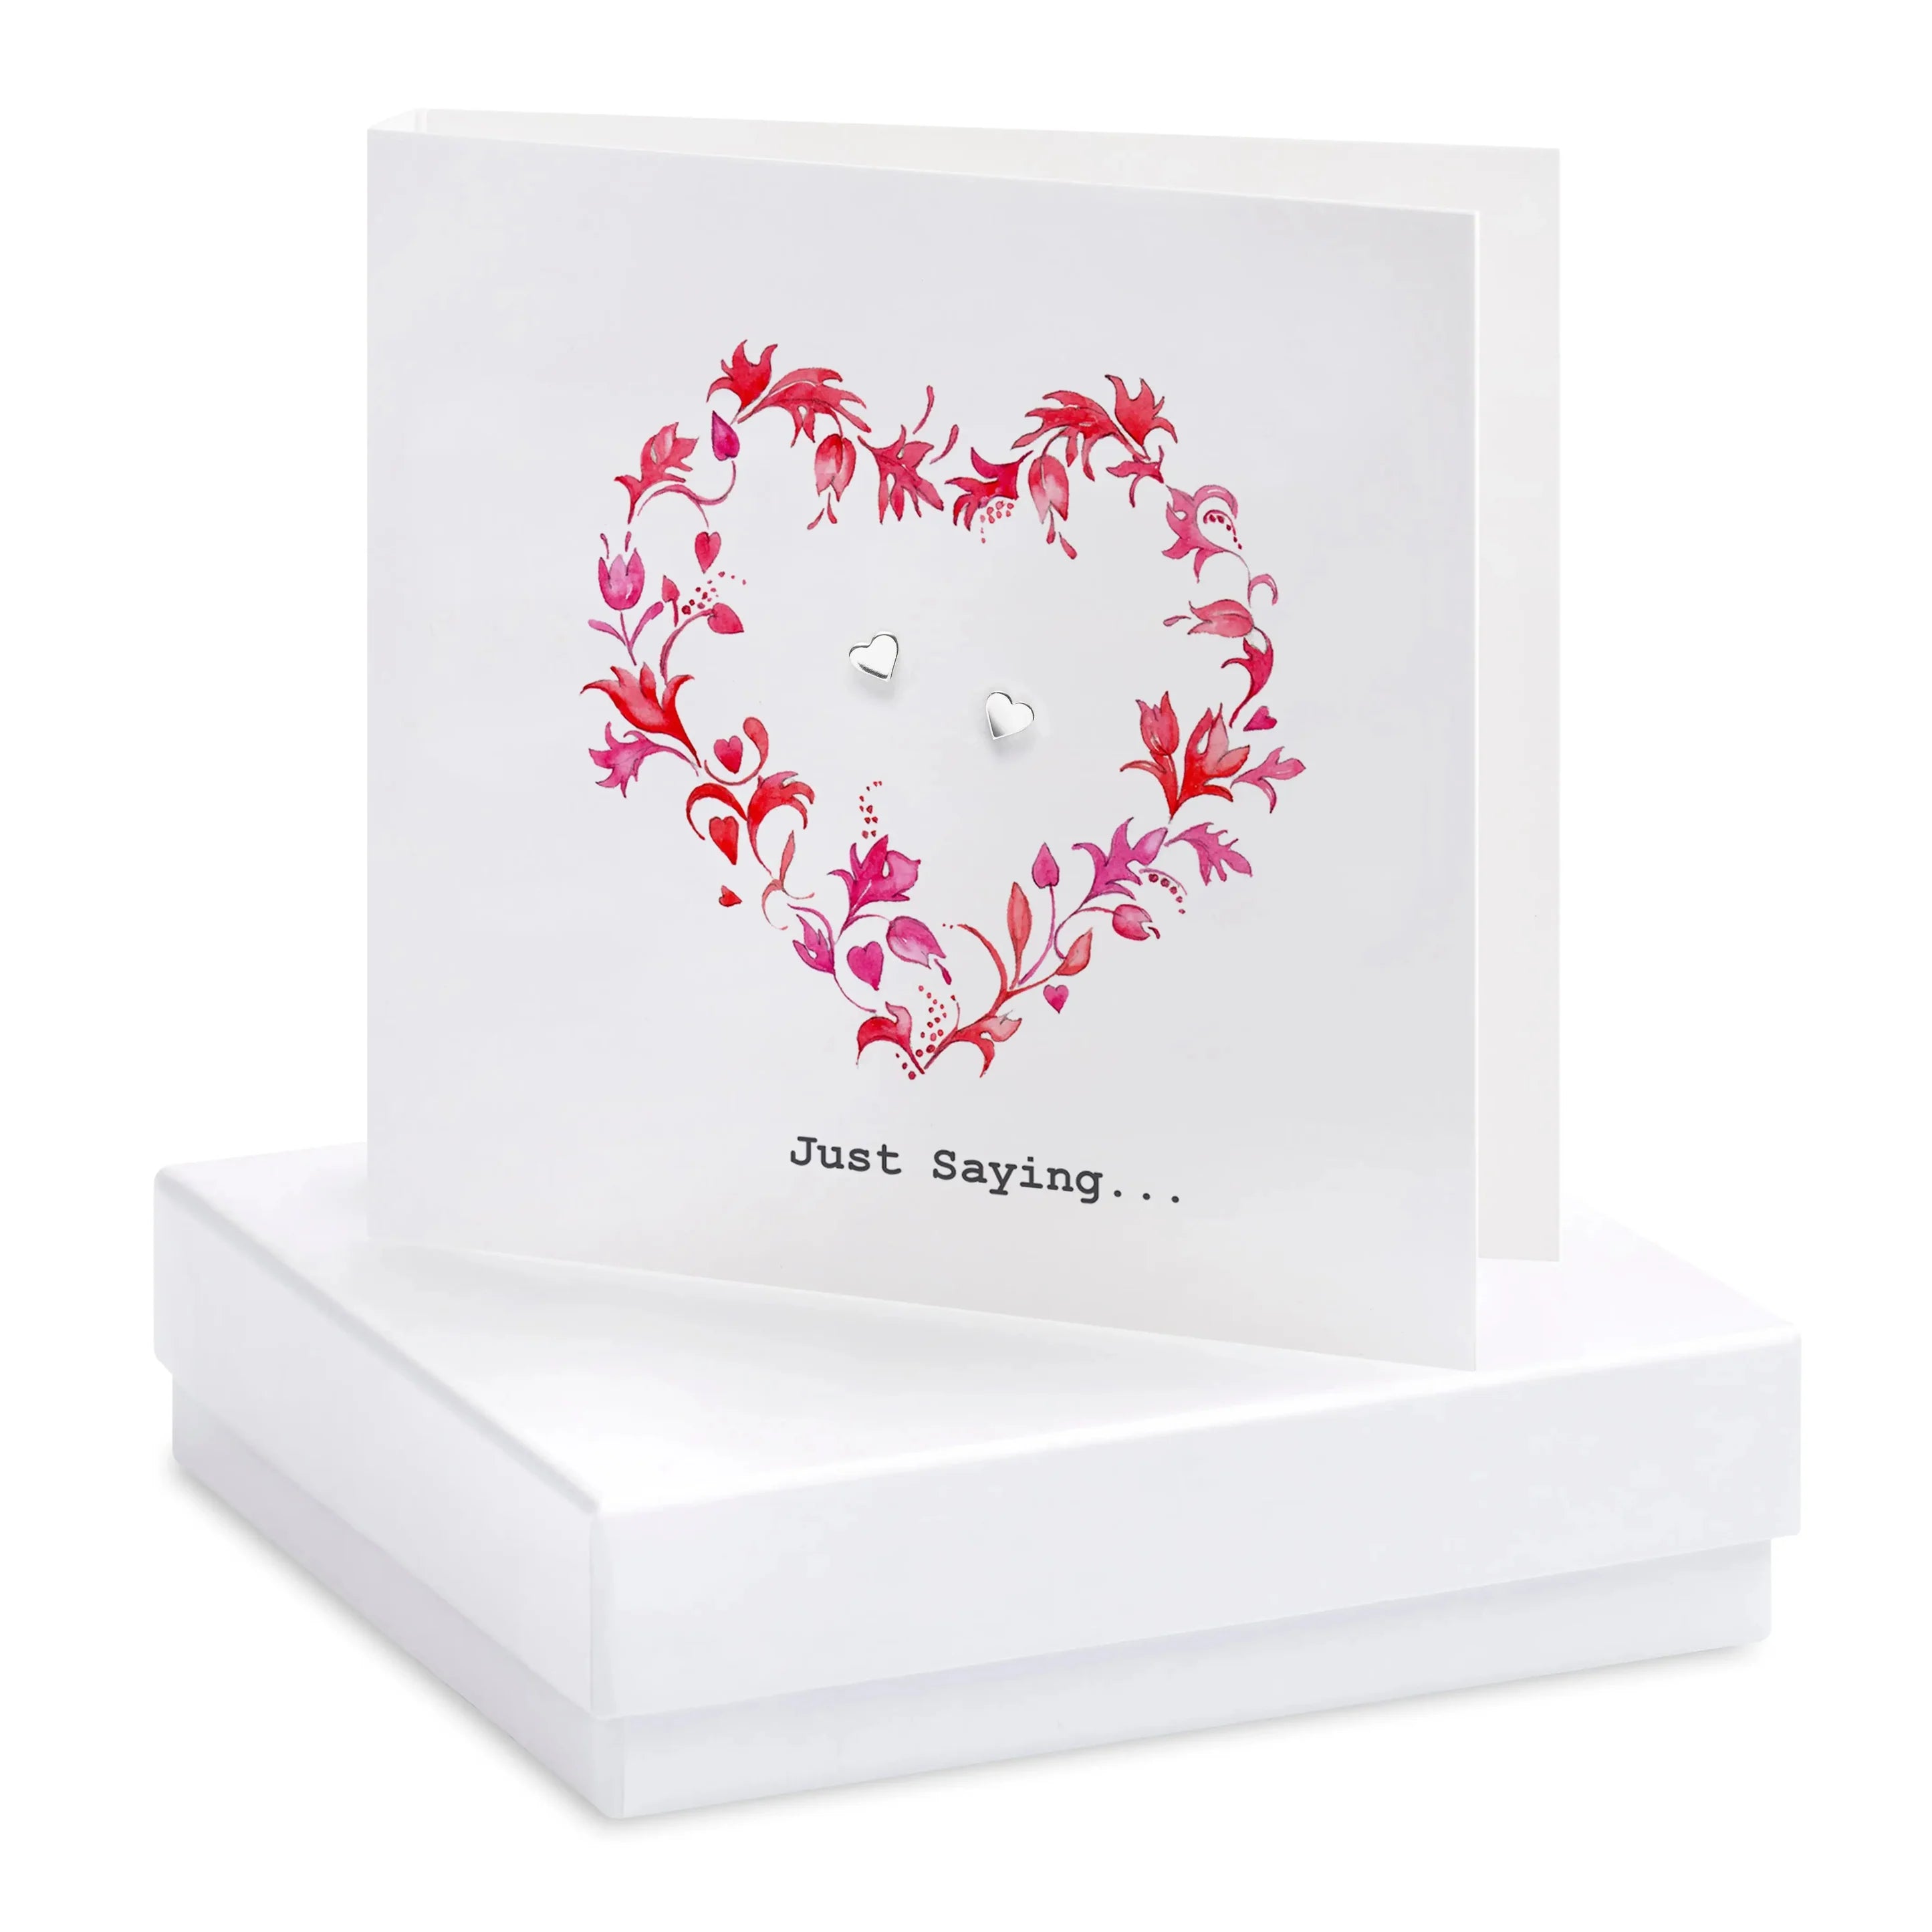 Fabulous Gifts Crumble & Core Box Red Heart Earring Card  by Weirs of Baggot Street